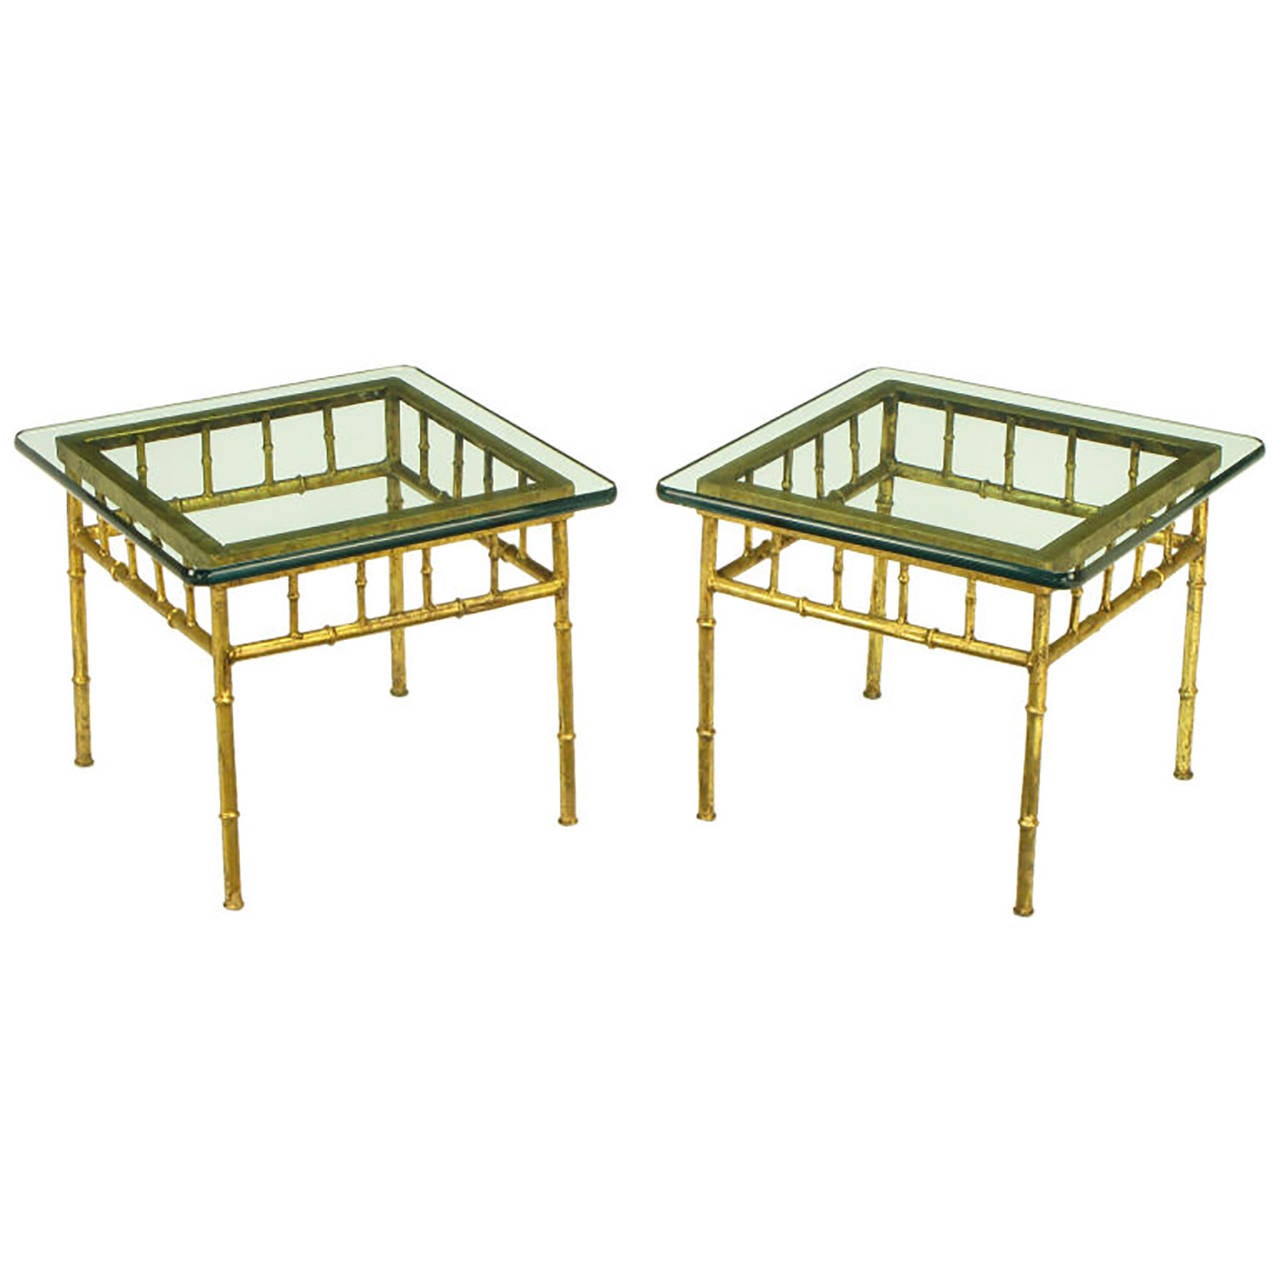 Pair of glazed gilt metal faux bamboo framed side tables with 1/2